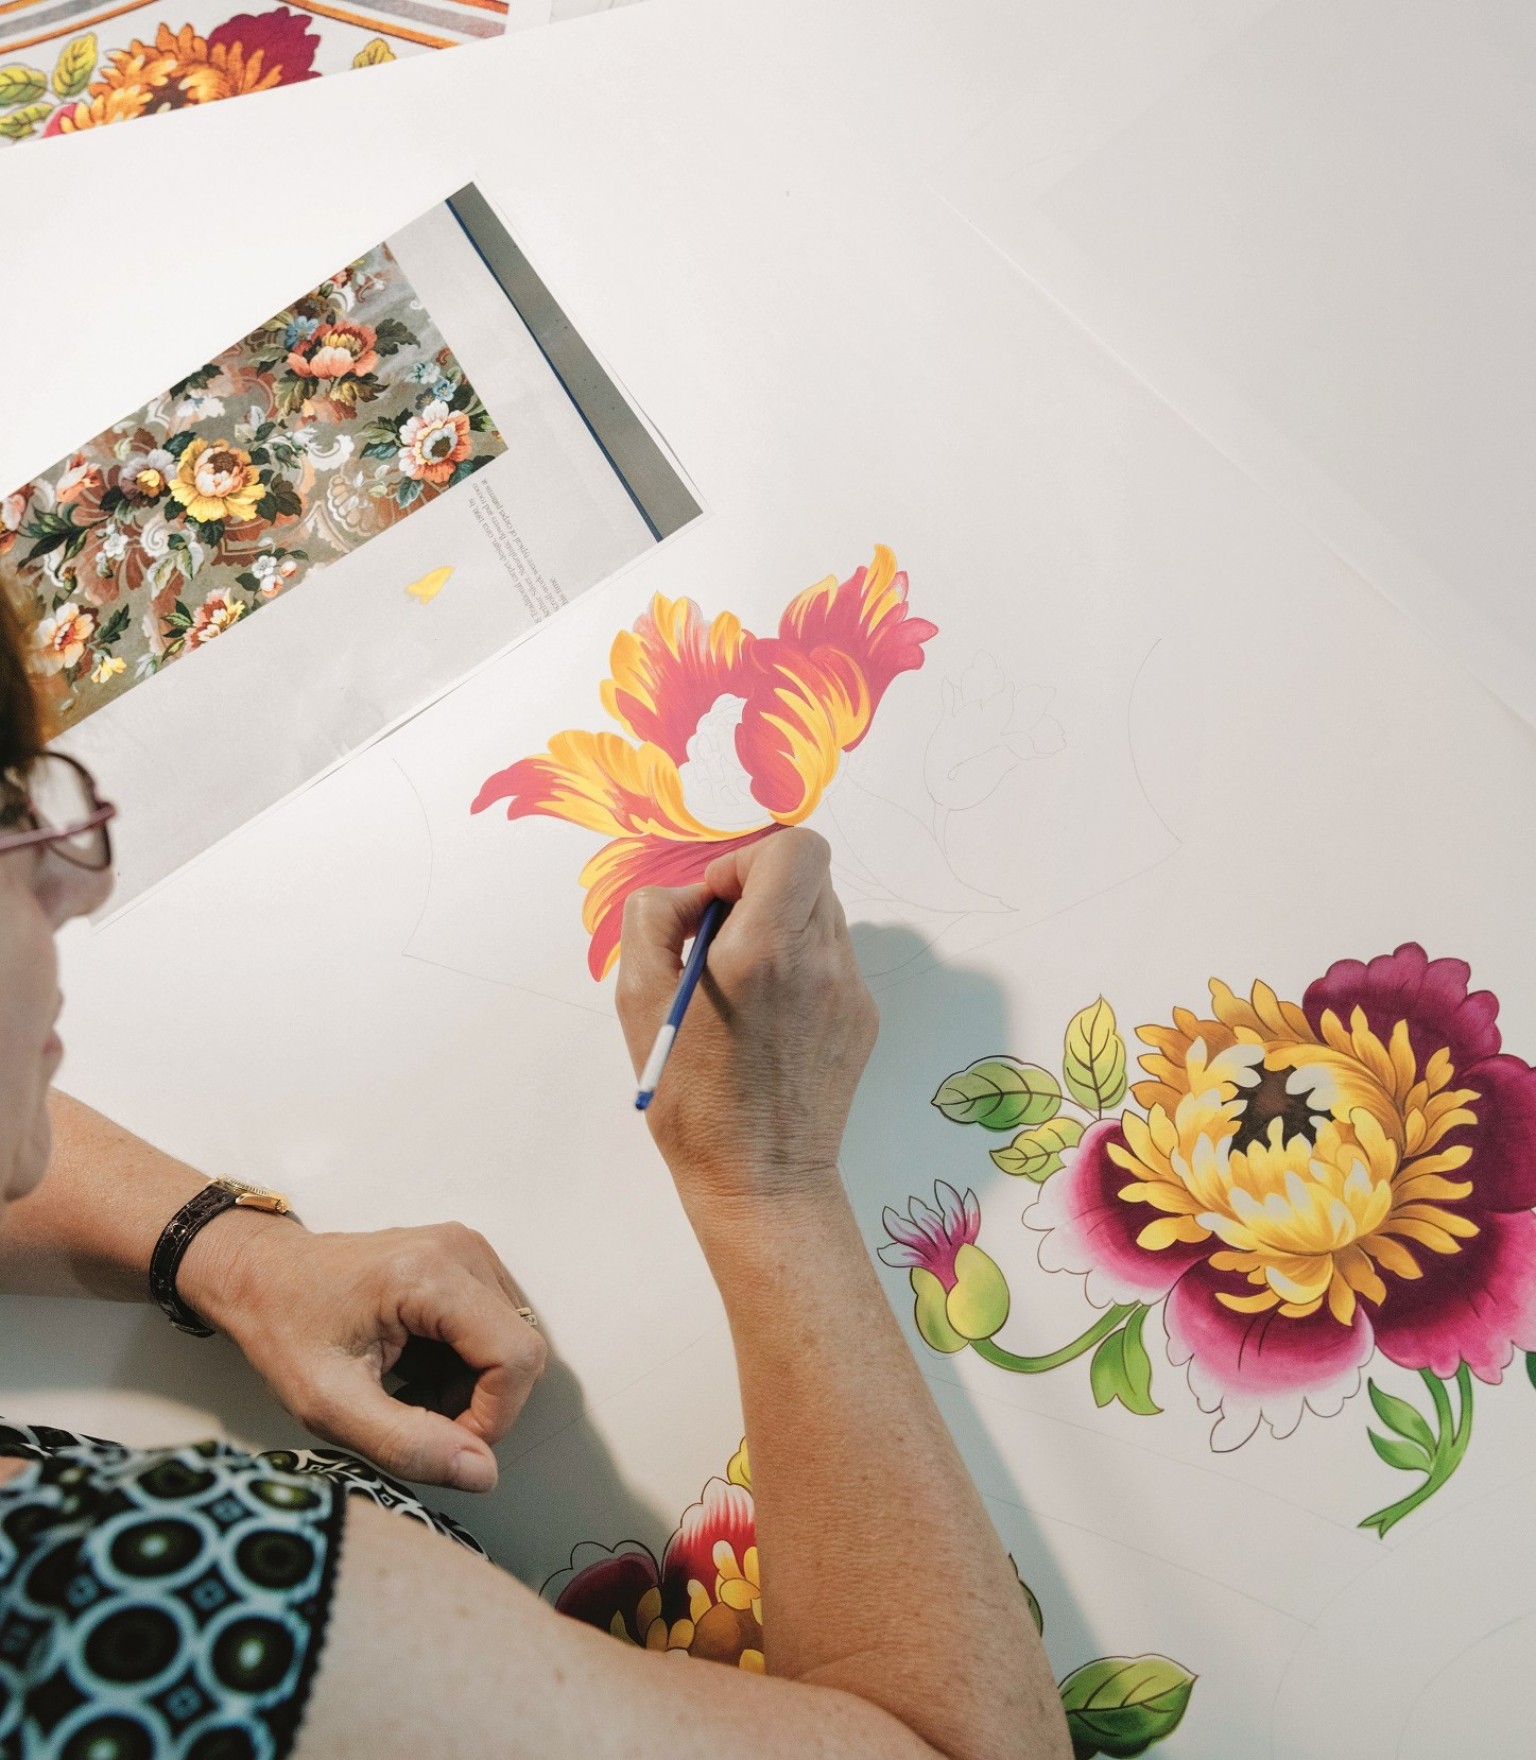 A floral design is painted on paper